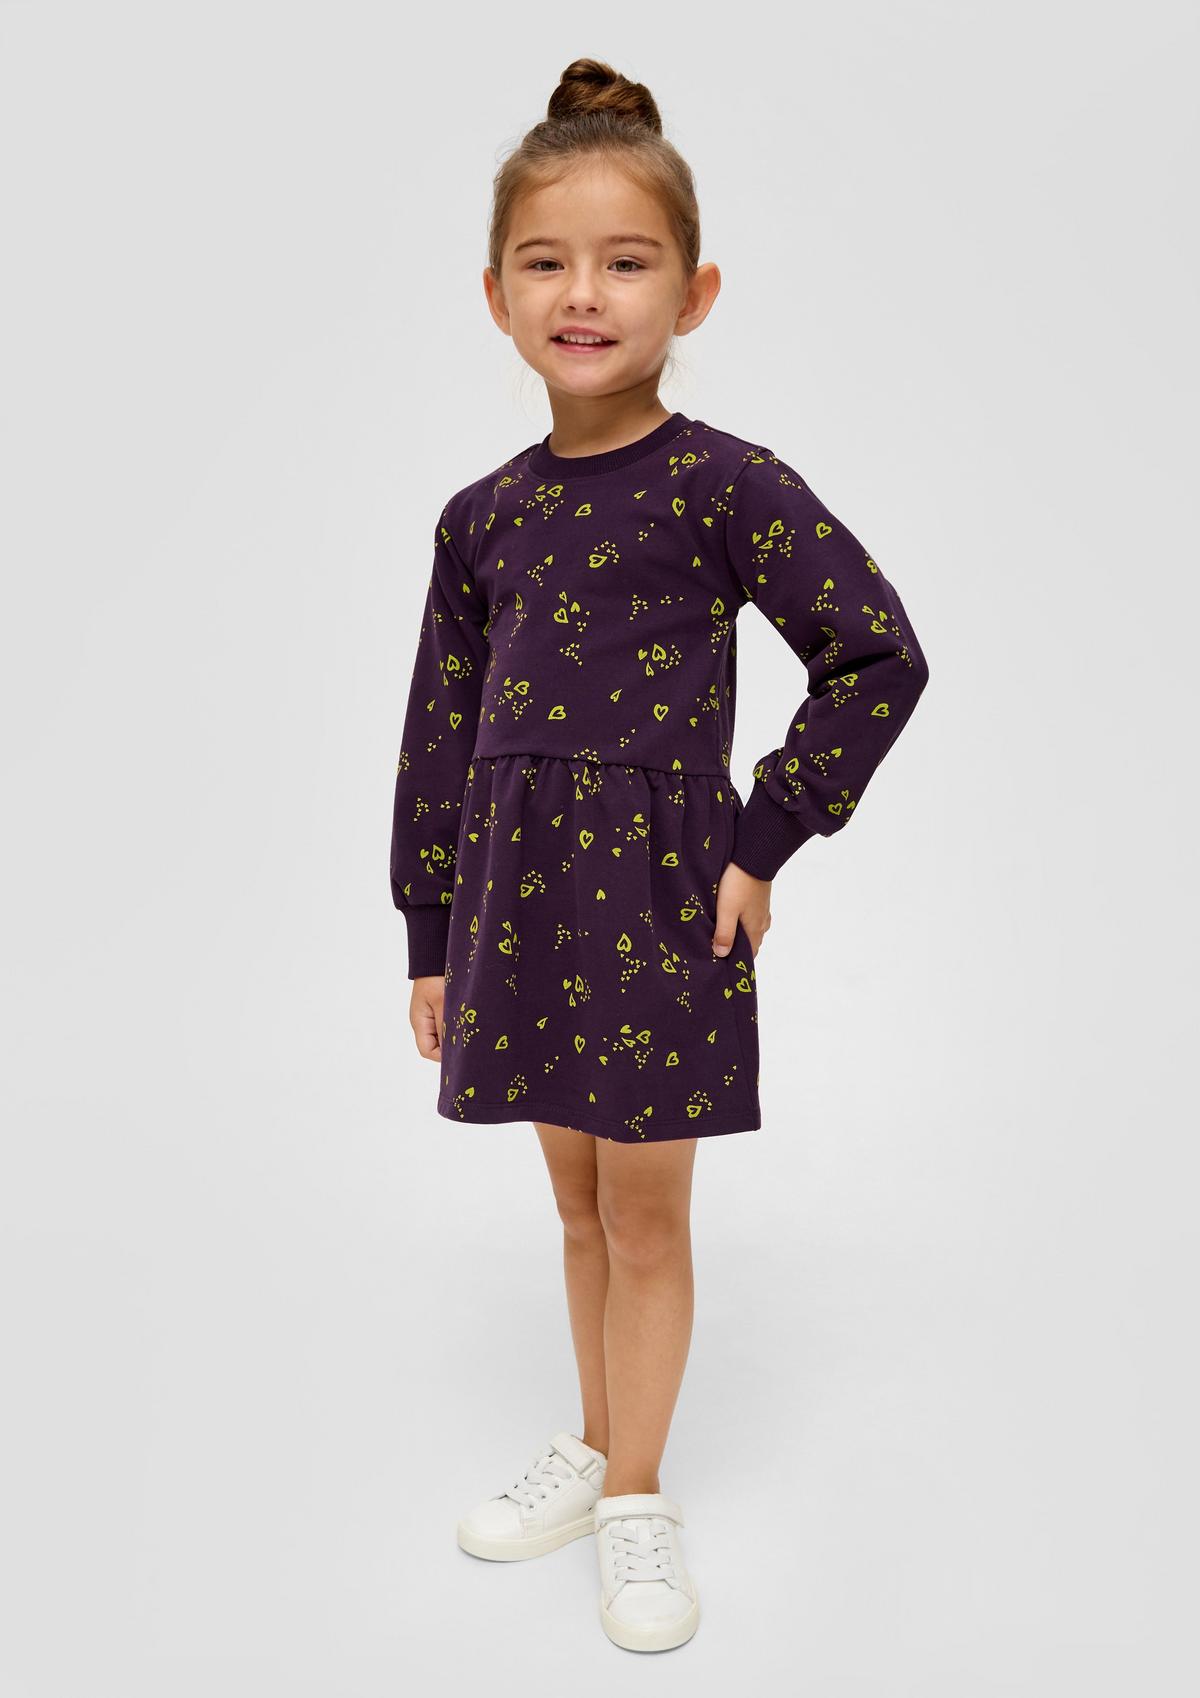 s.Oliver Sweatshirt dress with an all-over print